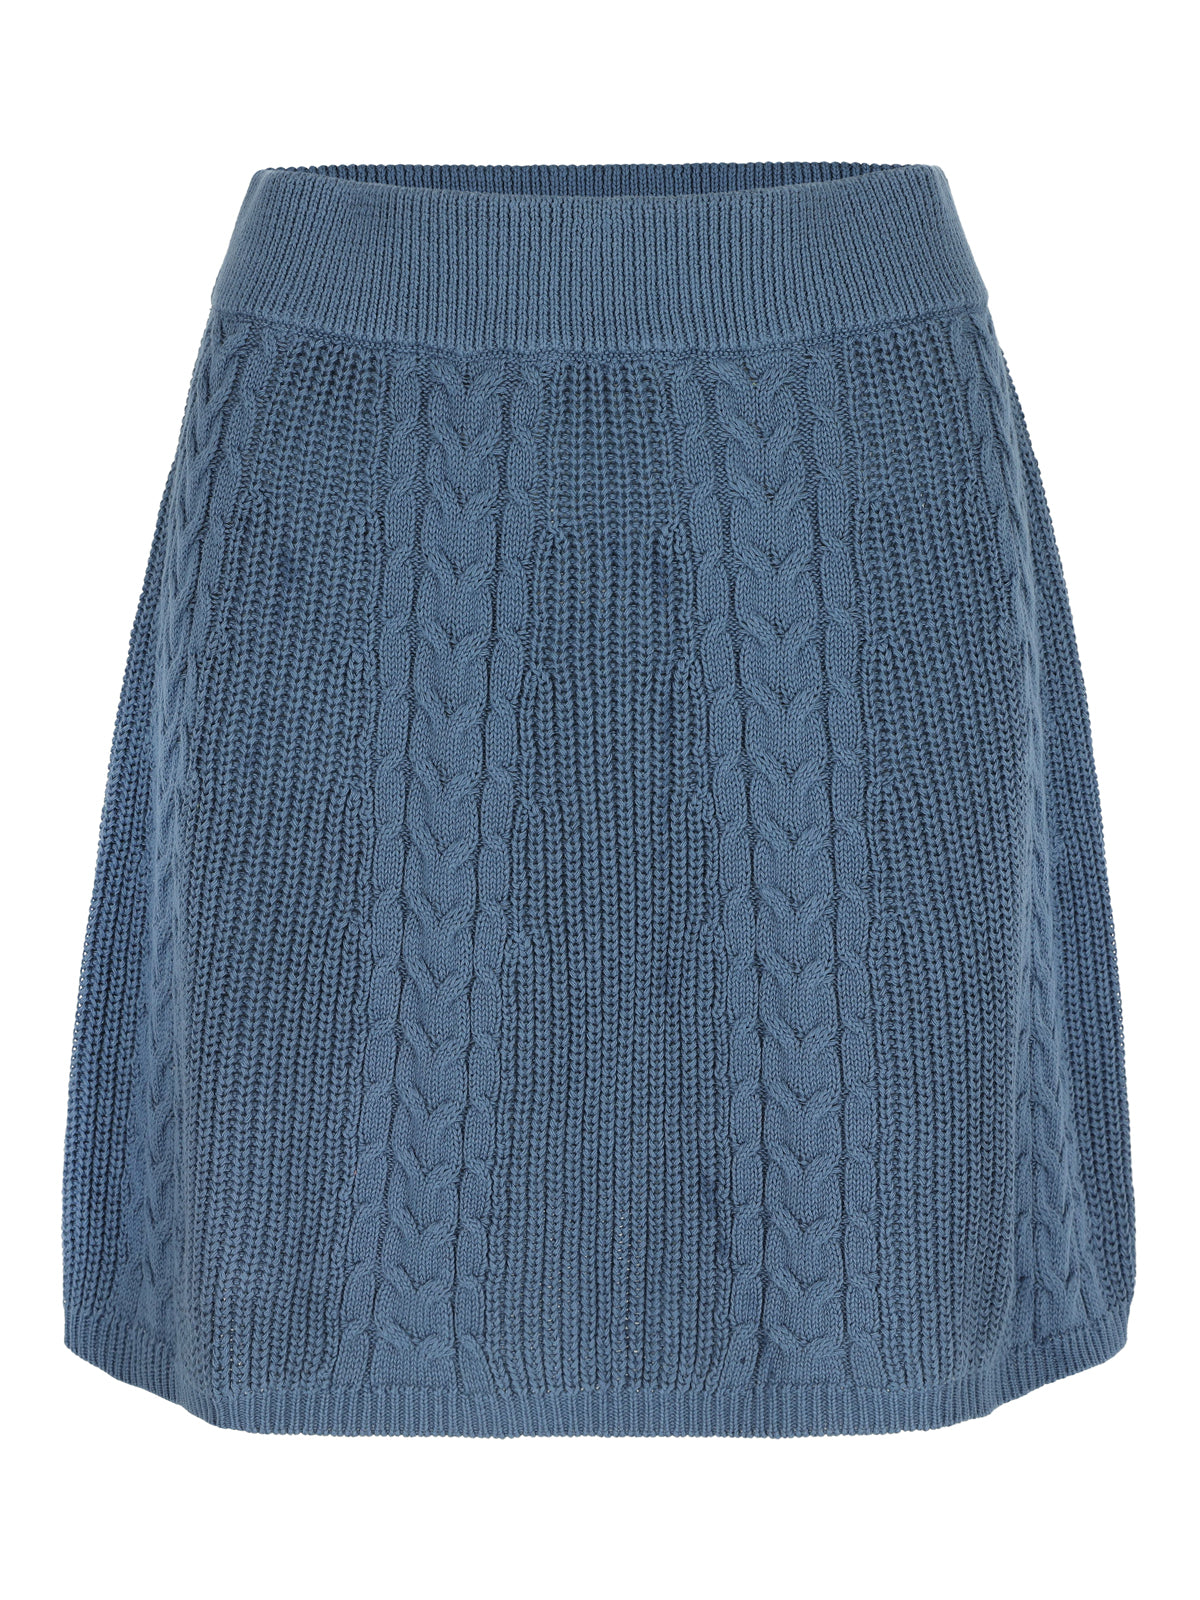 Melvie cable skirt